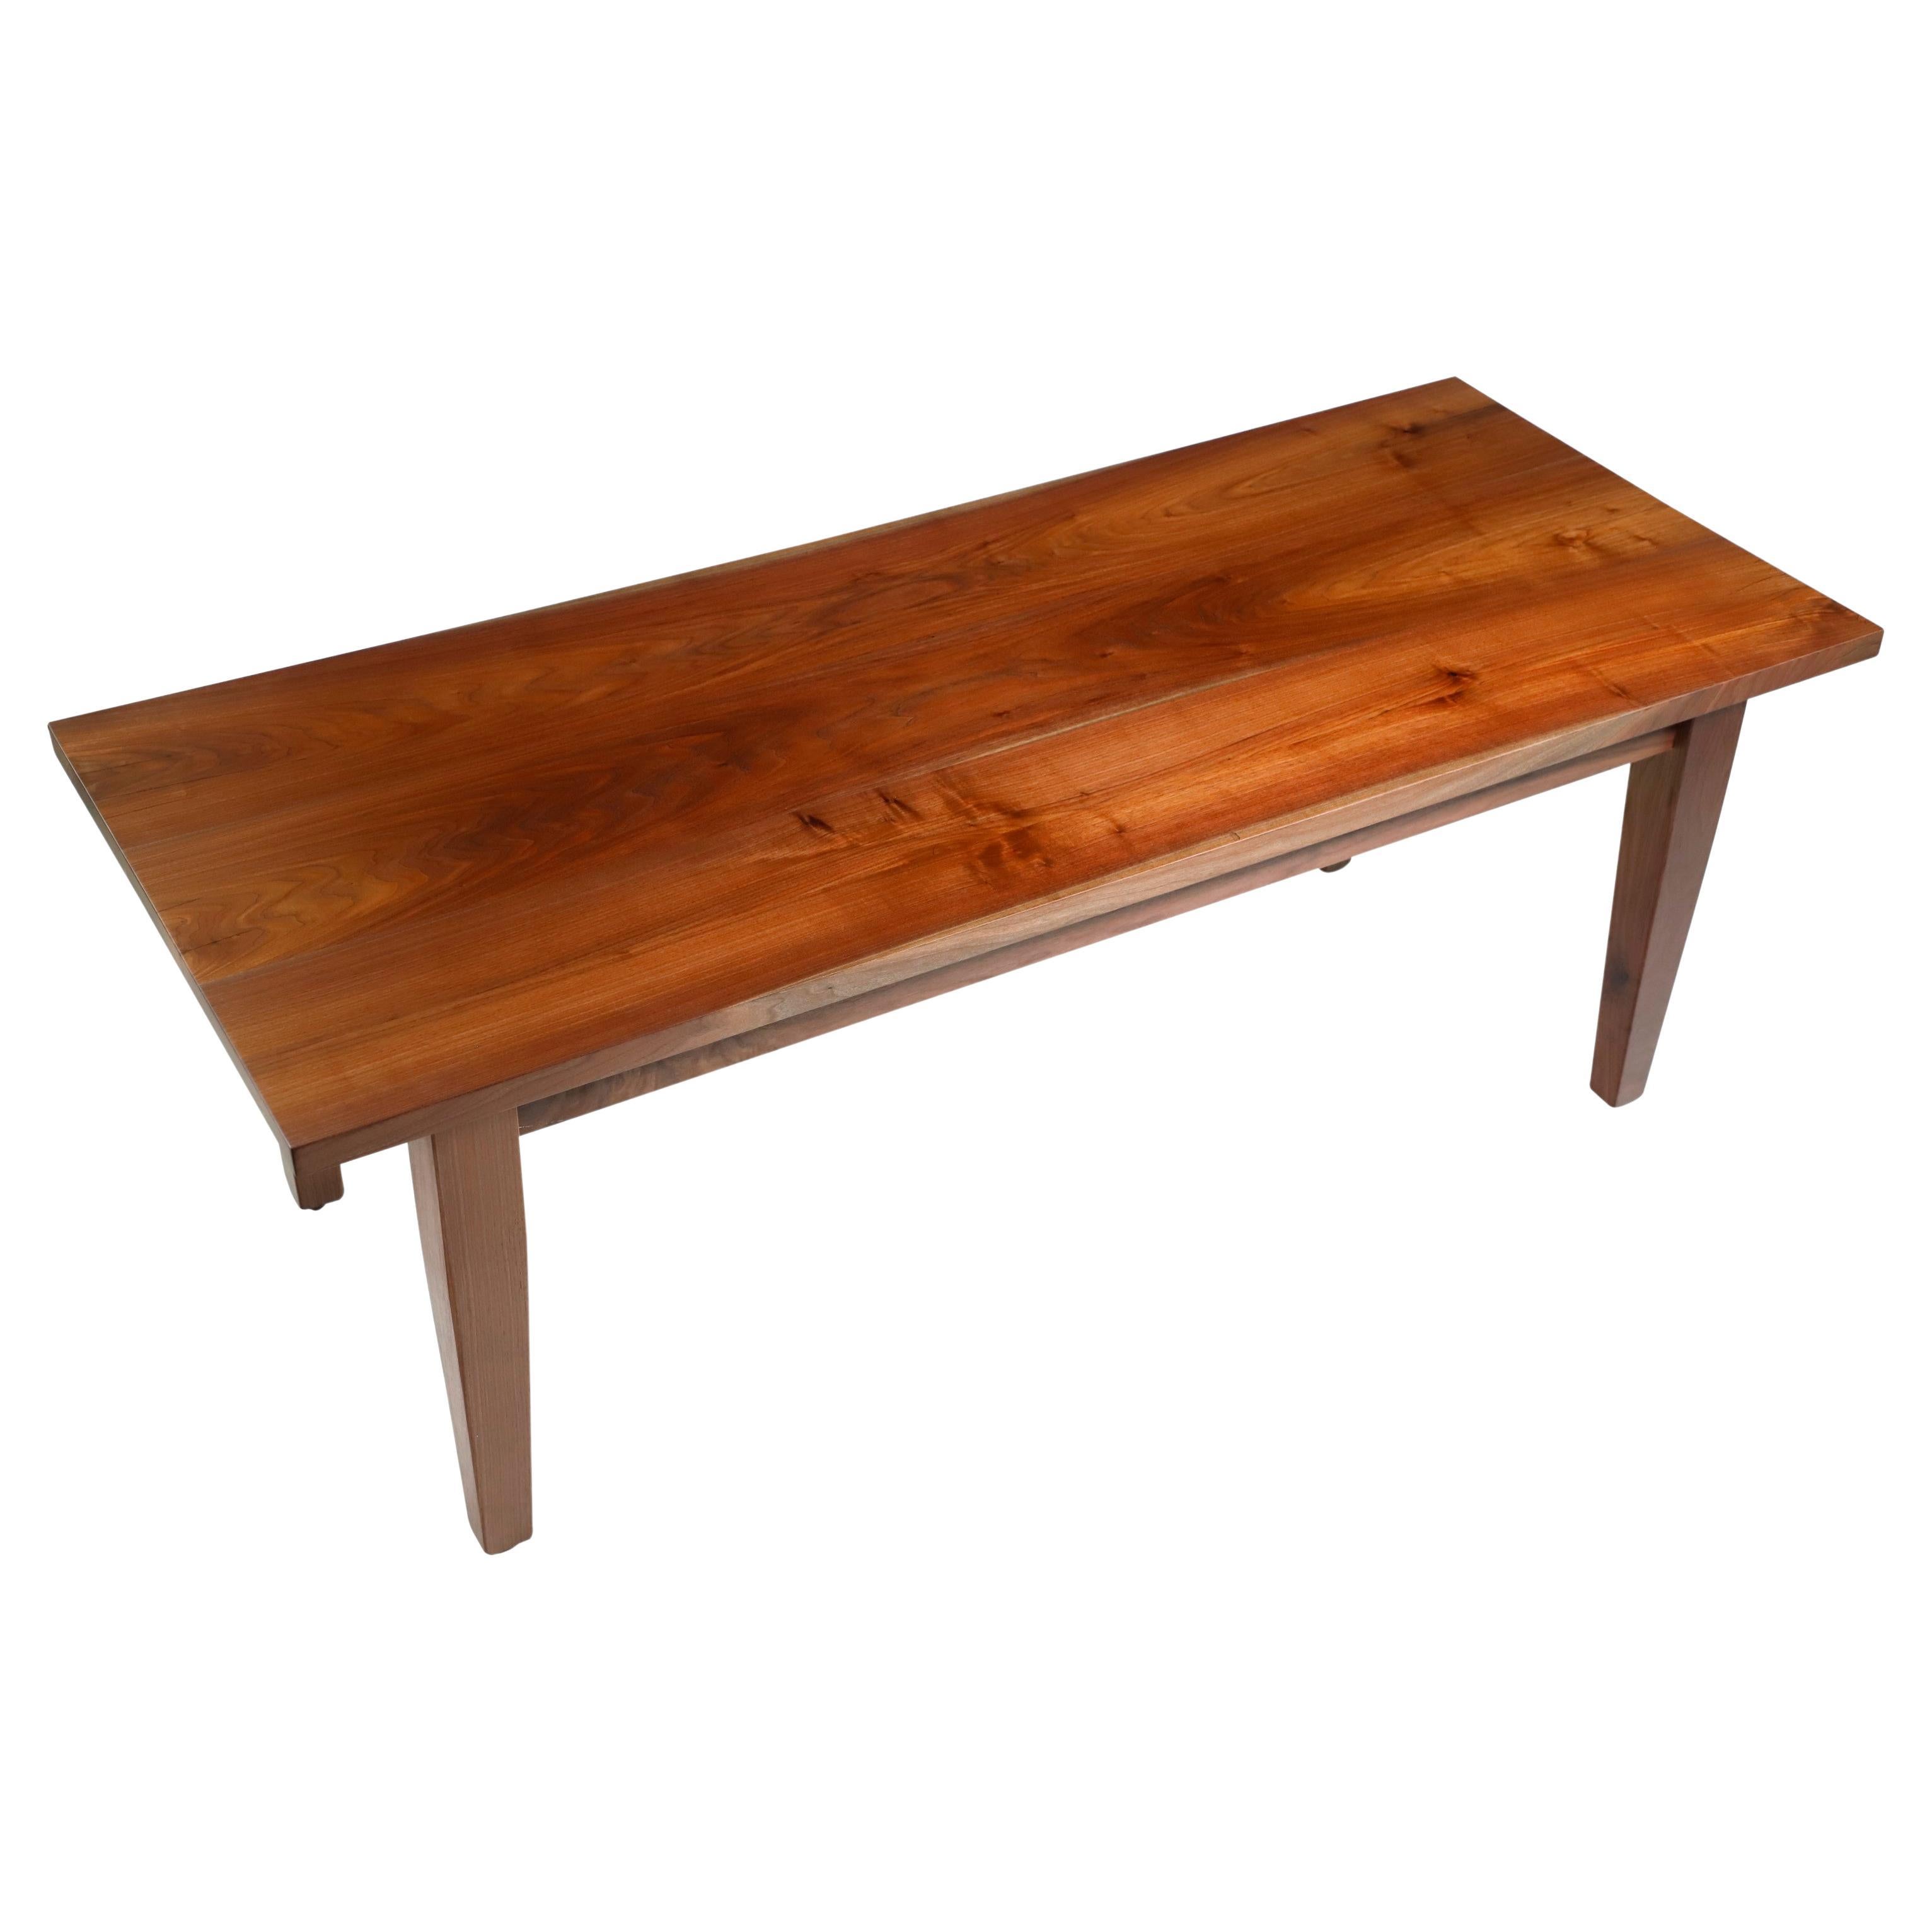 7 ft Solid Walnut Tapered Leg Dining Harvest Table